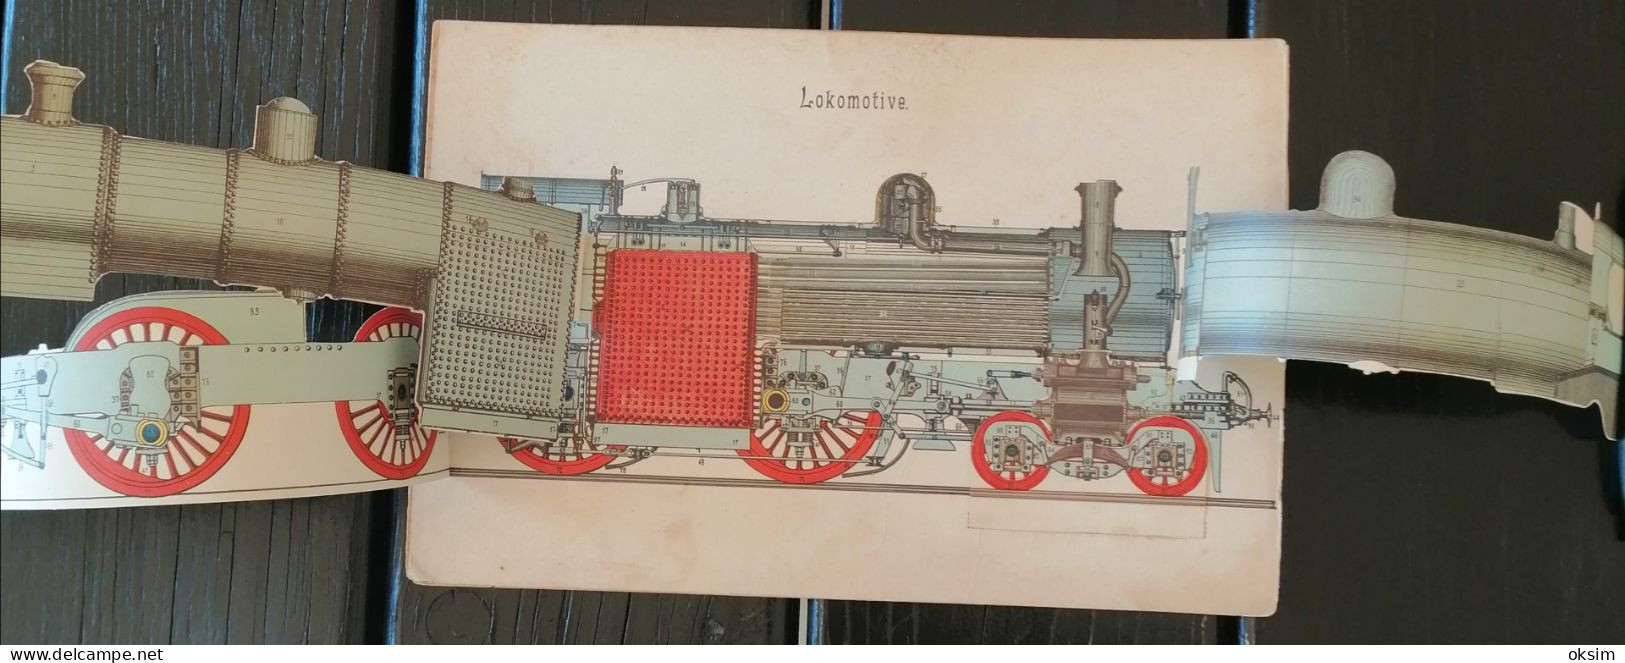 Drawings Of Machinery In Colour, Consisting Of Several Layers That Can Be Unfolded To Show The Interior Of The Machines - Maschinen